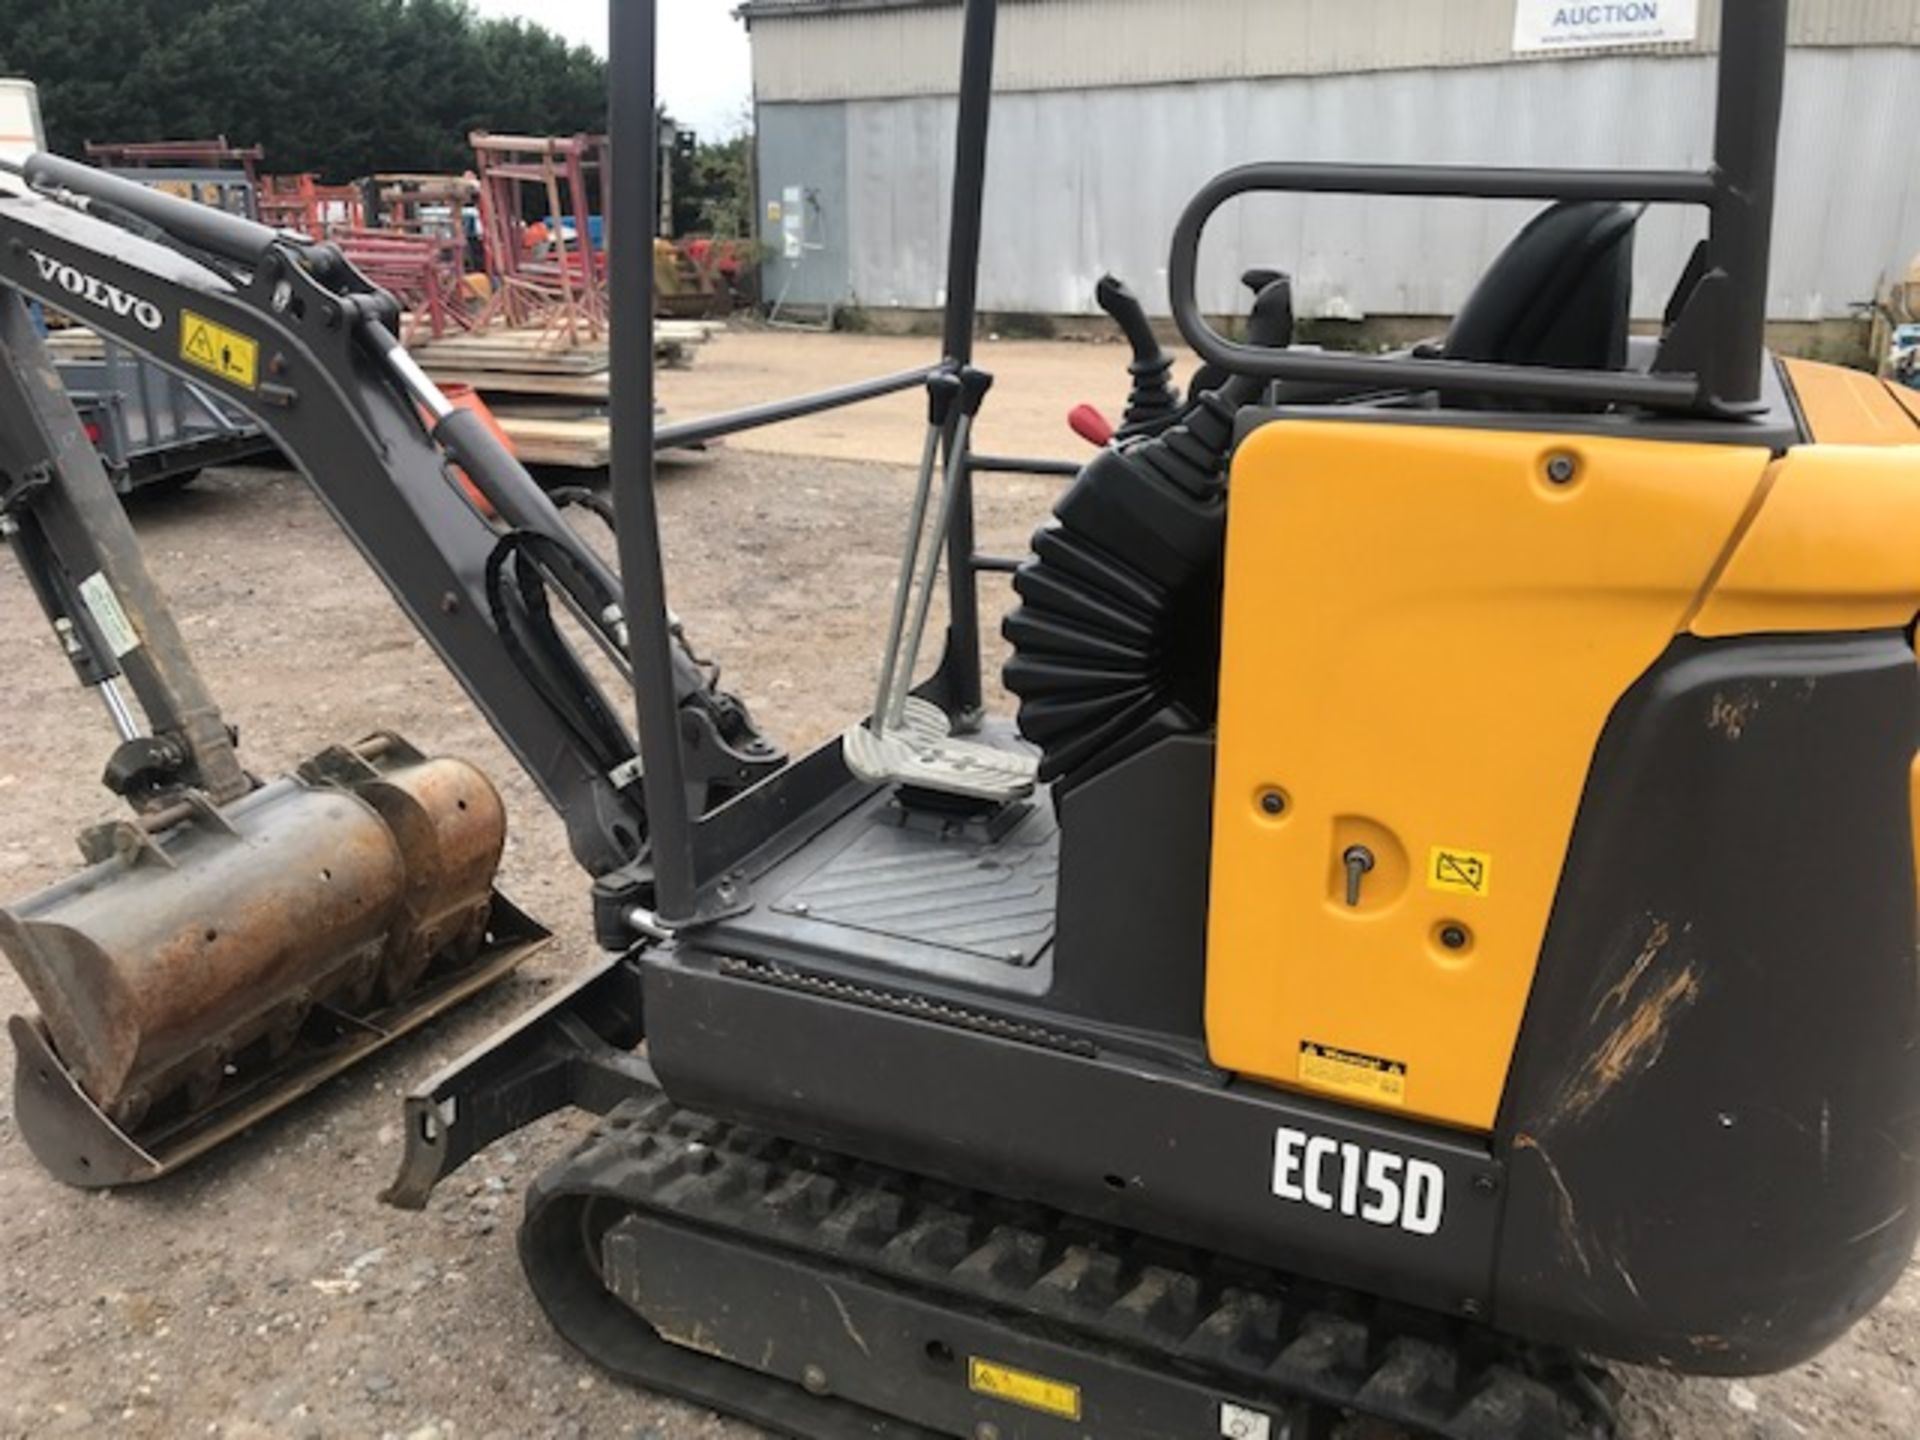 VOLVO EC15D 1.5 TONNE MINI DIGGER WITH SET OF BUCKETS YEAR 2015 BUILD. OWNED BY SELLER FROM NEW - Image 2 of 18